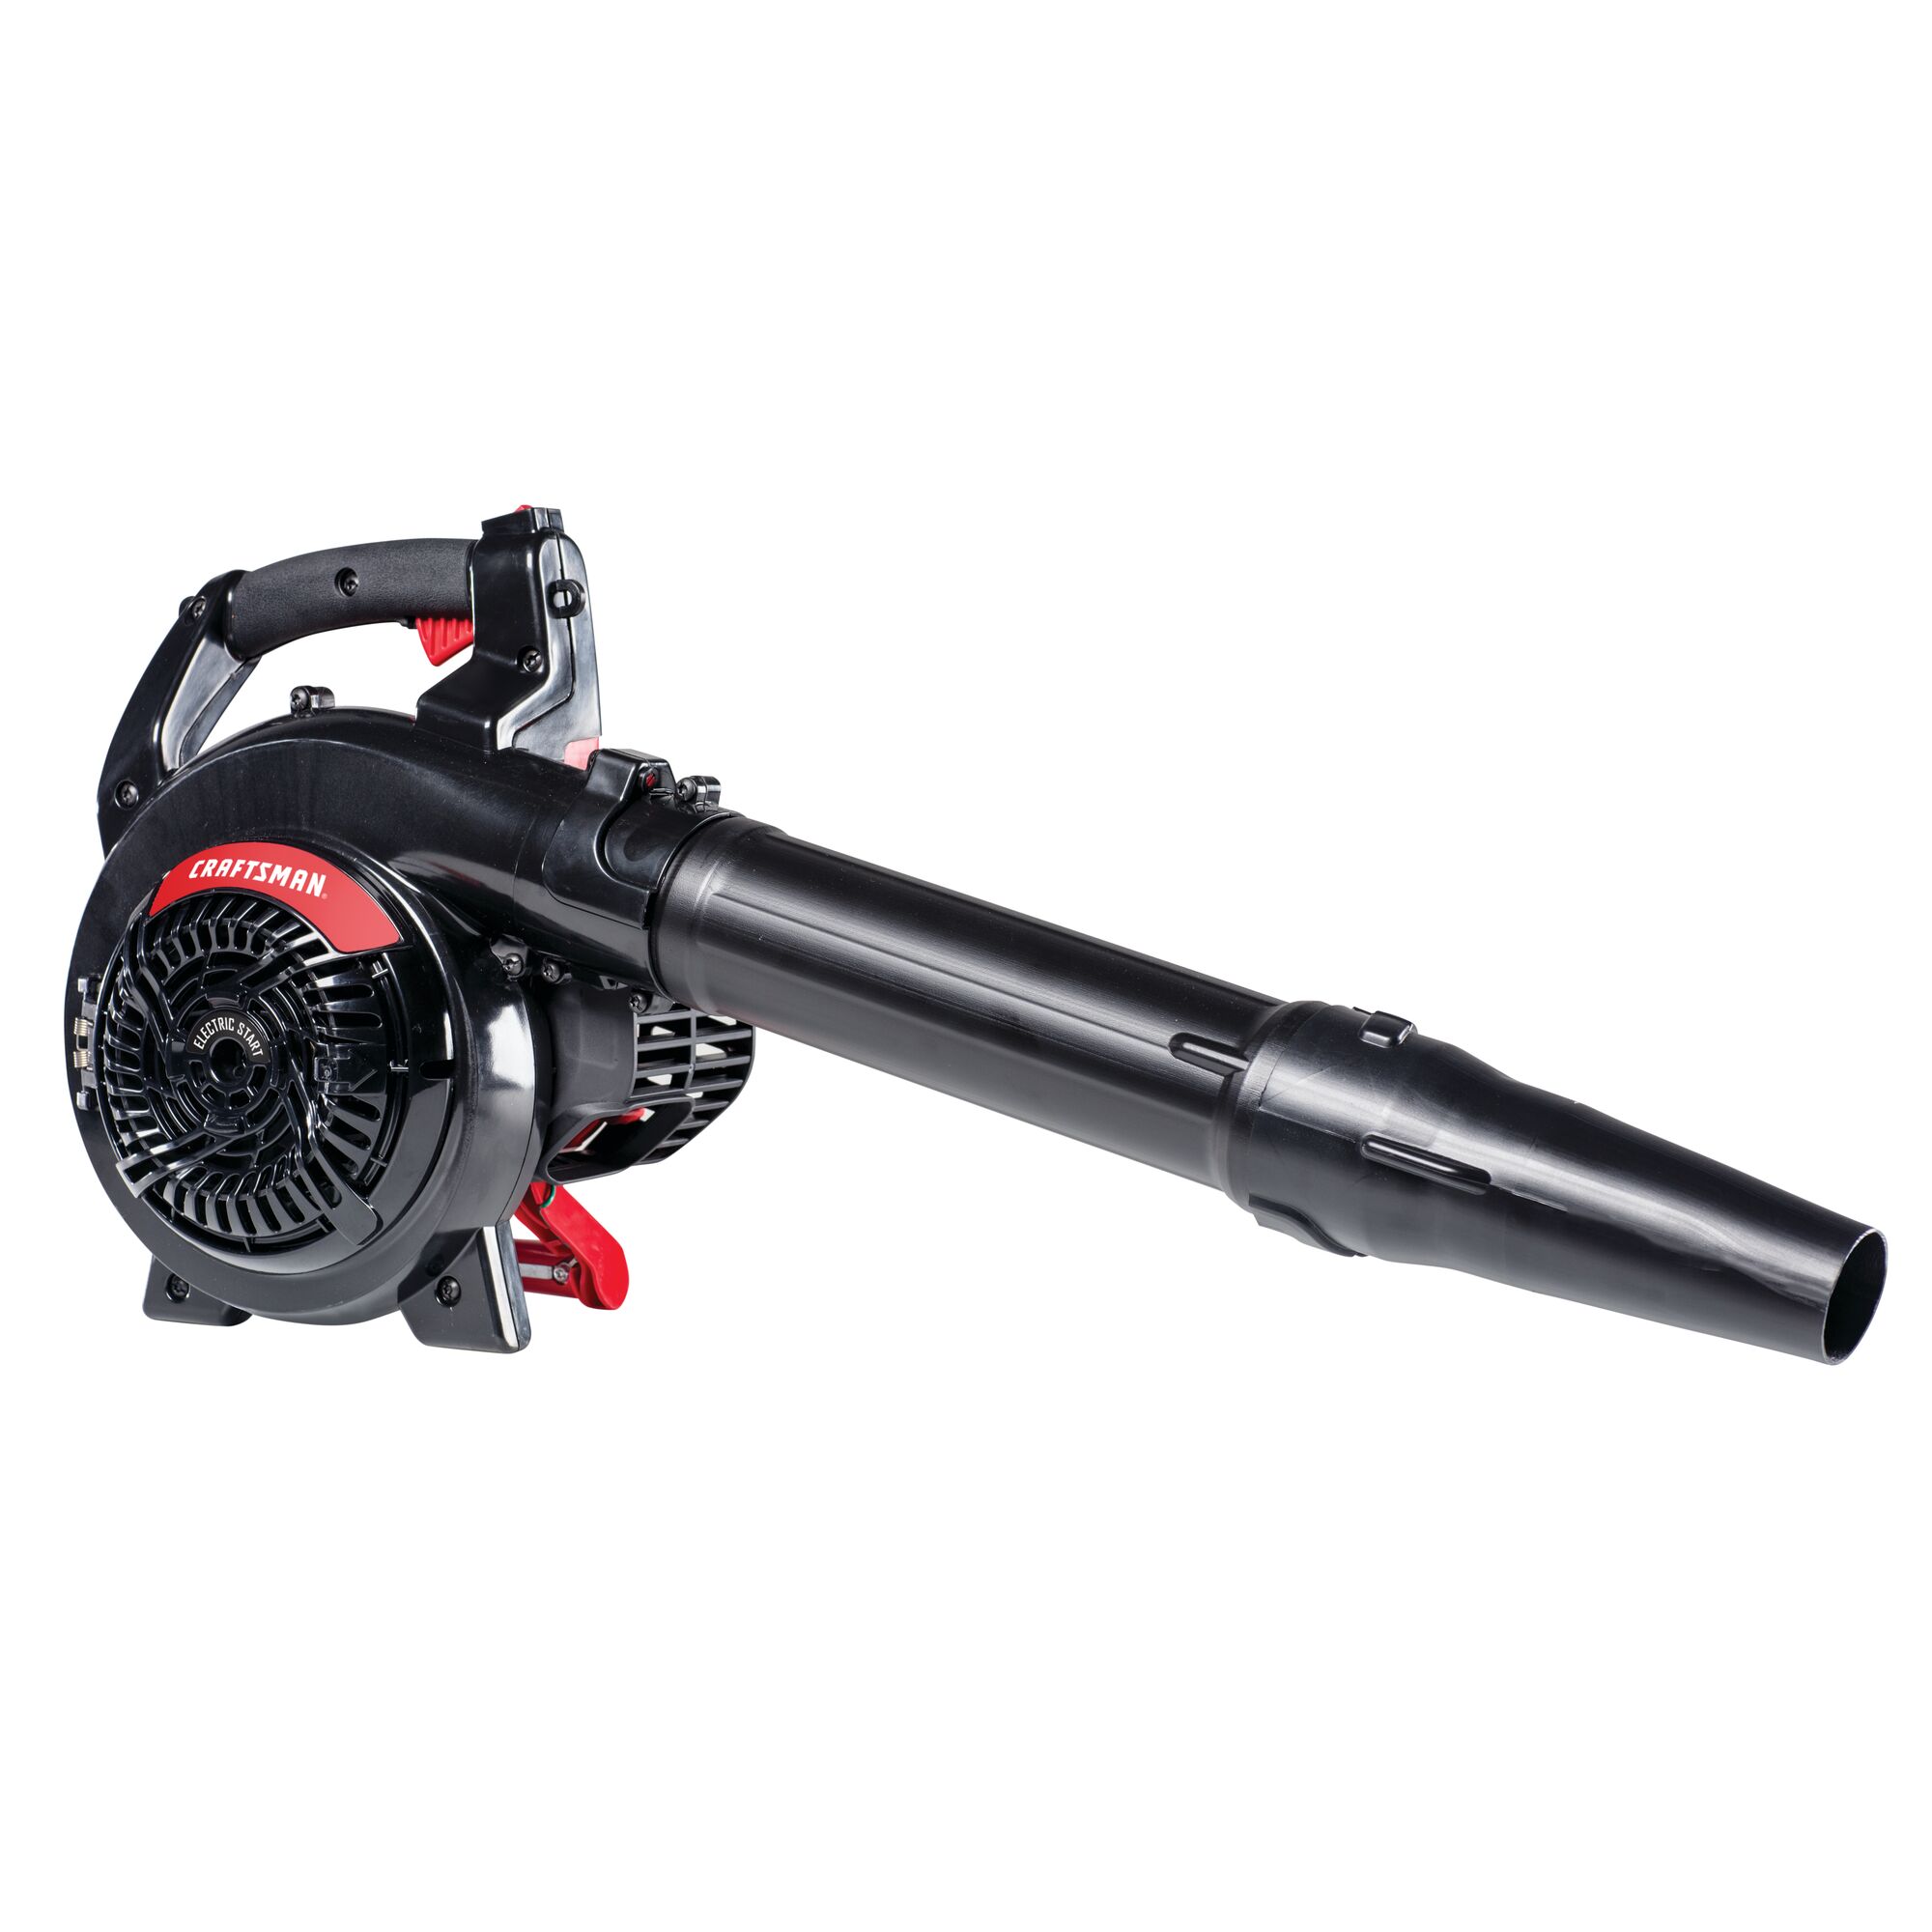 Right profile of 27 C C 2 cycle leaf blower vacuum.